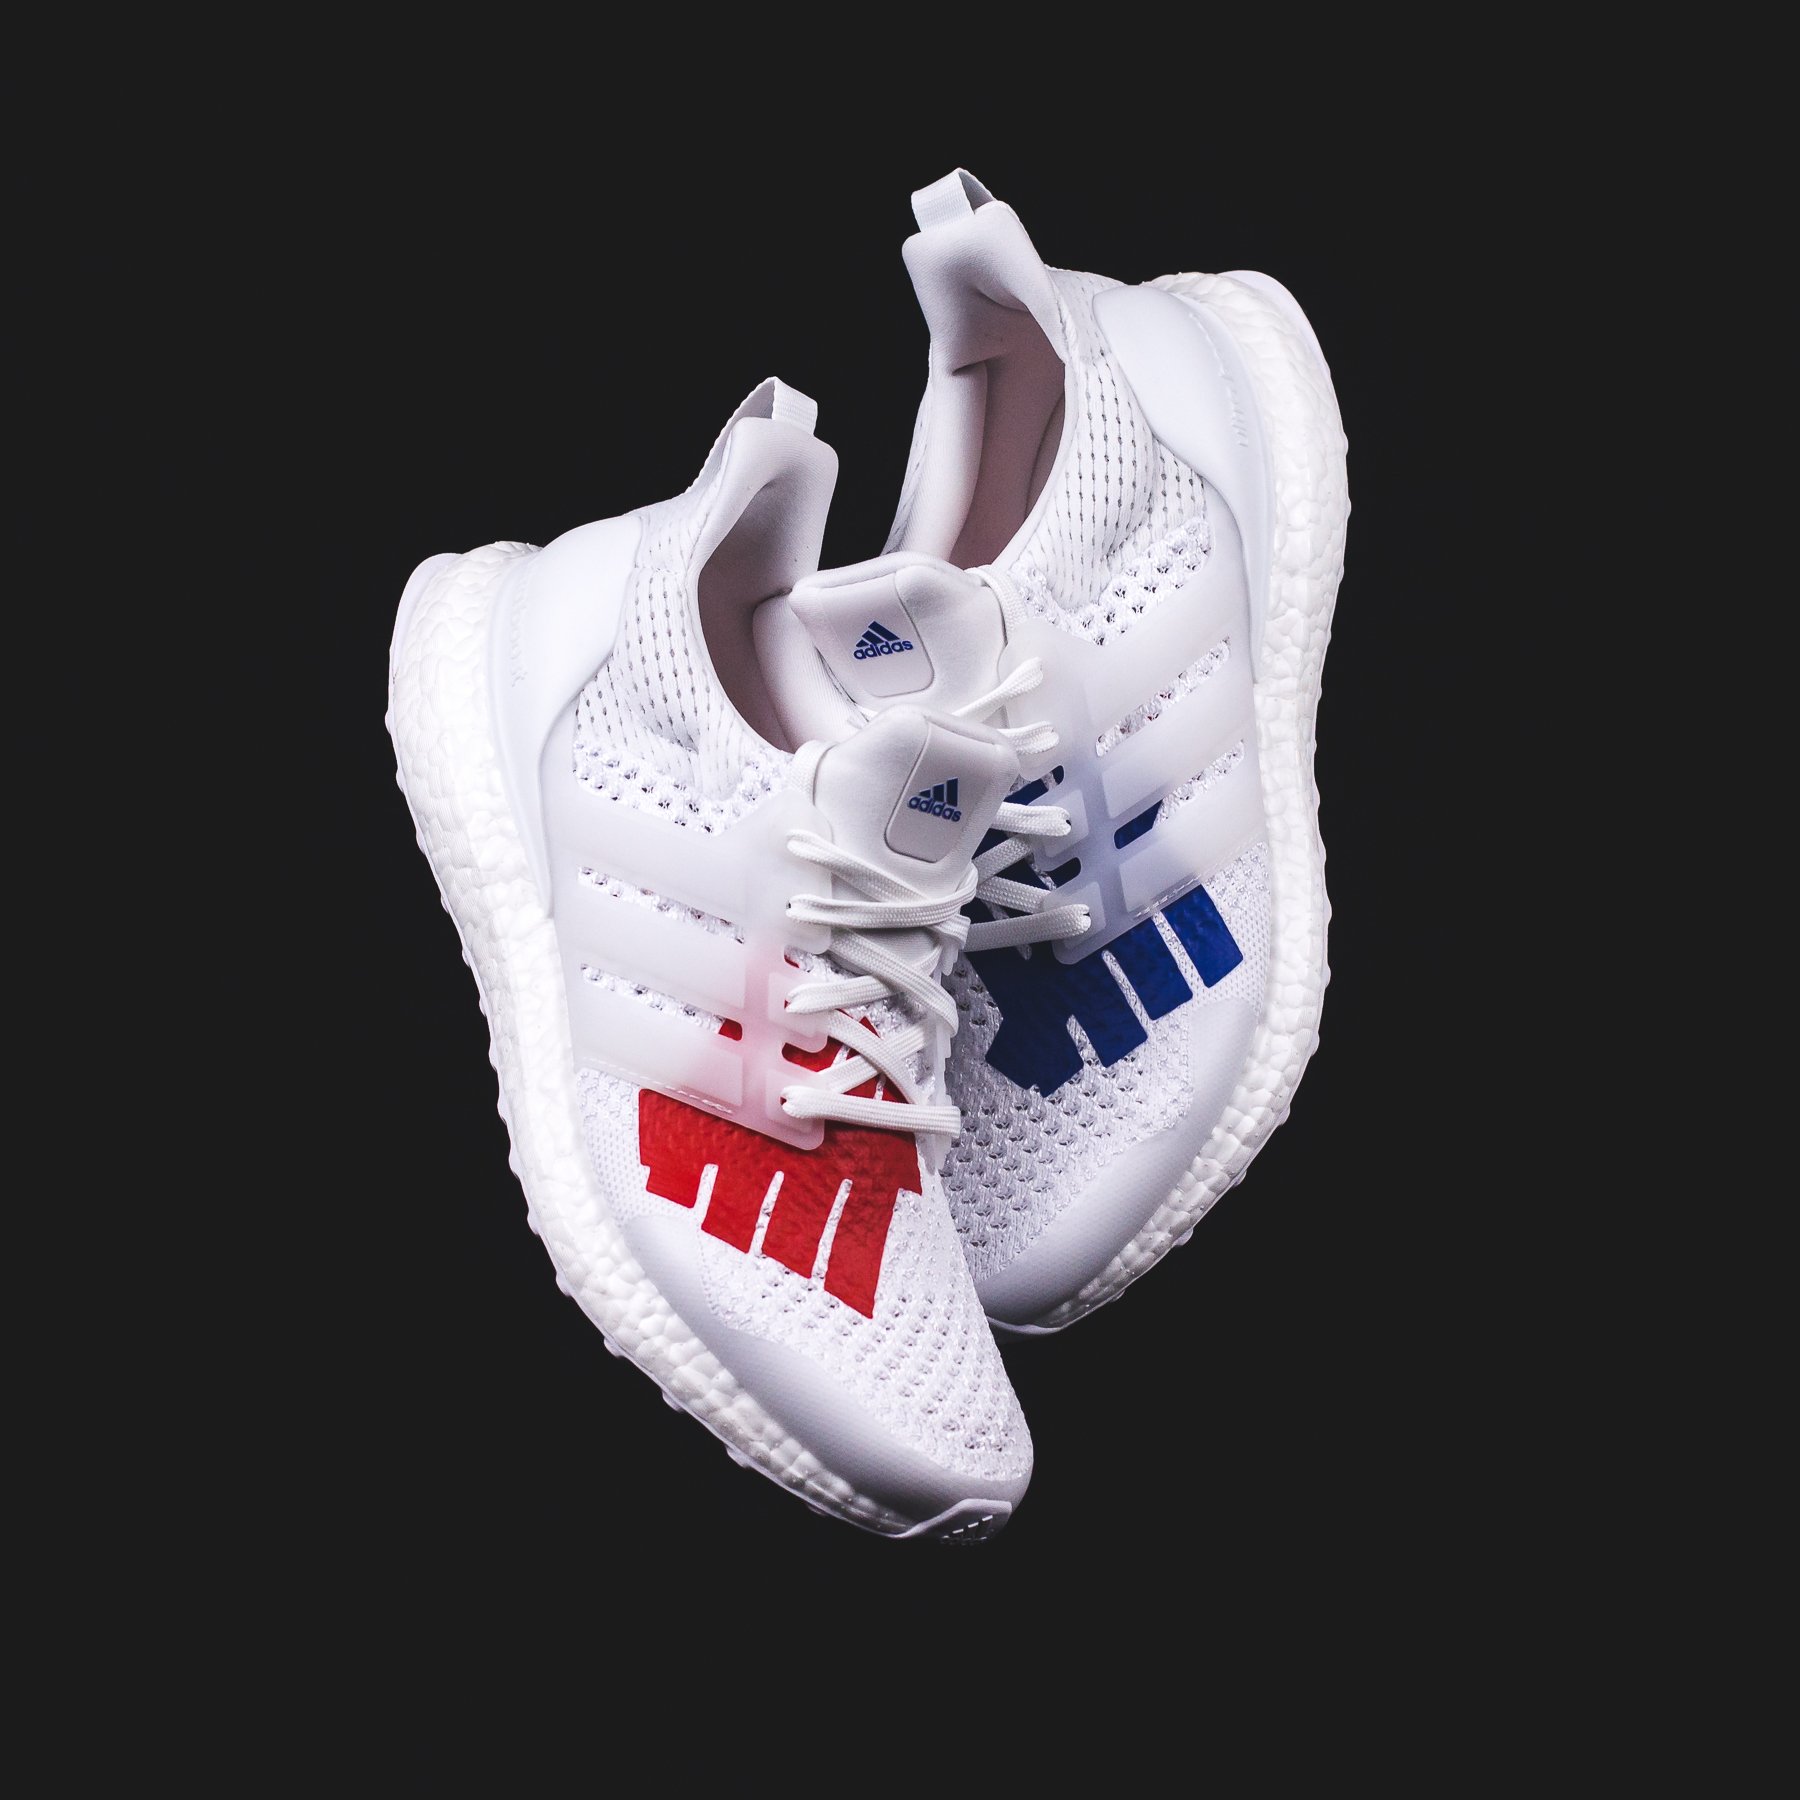 Undefeated x adidas UltraBOOST 1.0 